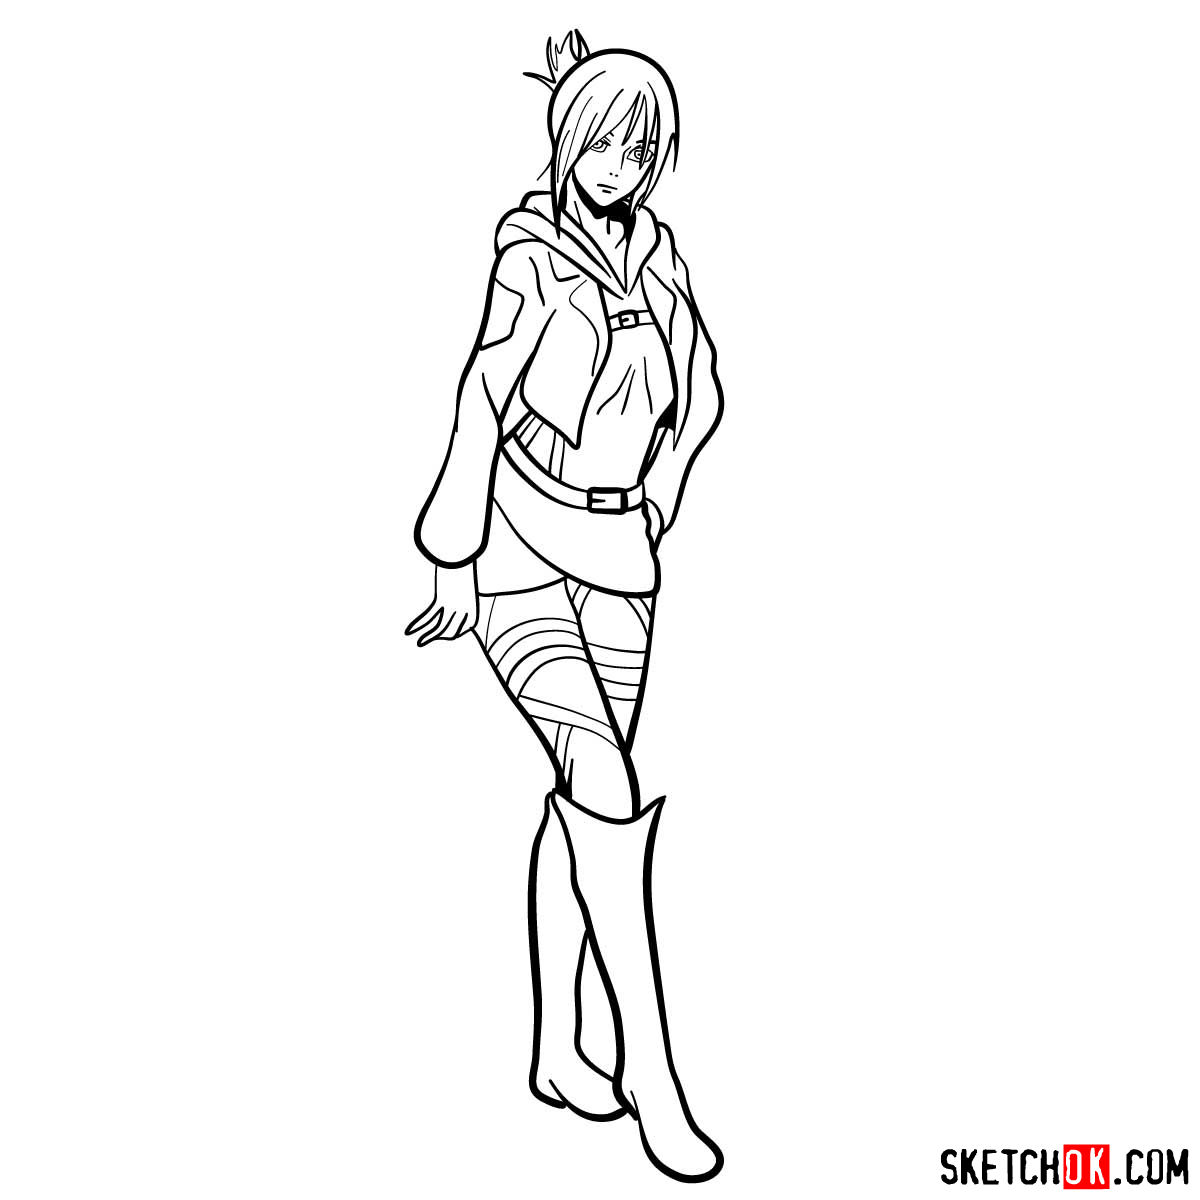 Anime Coloring Pages Attack On Titan   Coloring and Drawing